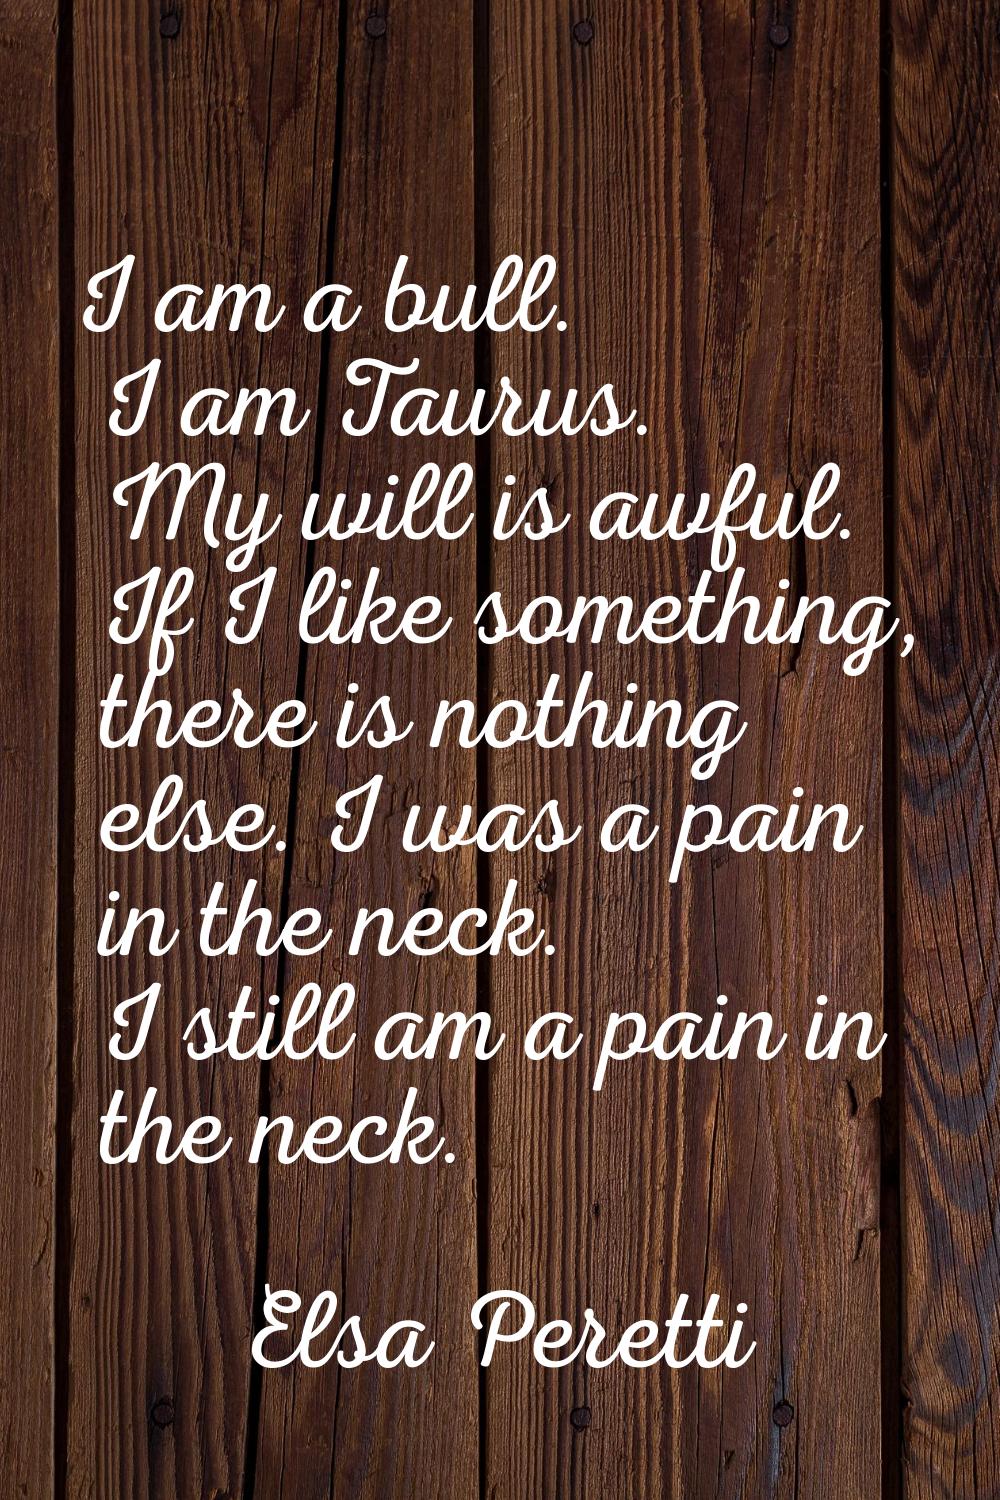 I am a bull. I am Taurus. My will is awful. If I like something, there is nothing else. I was a pai